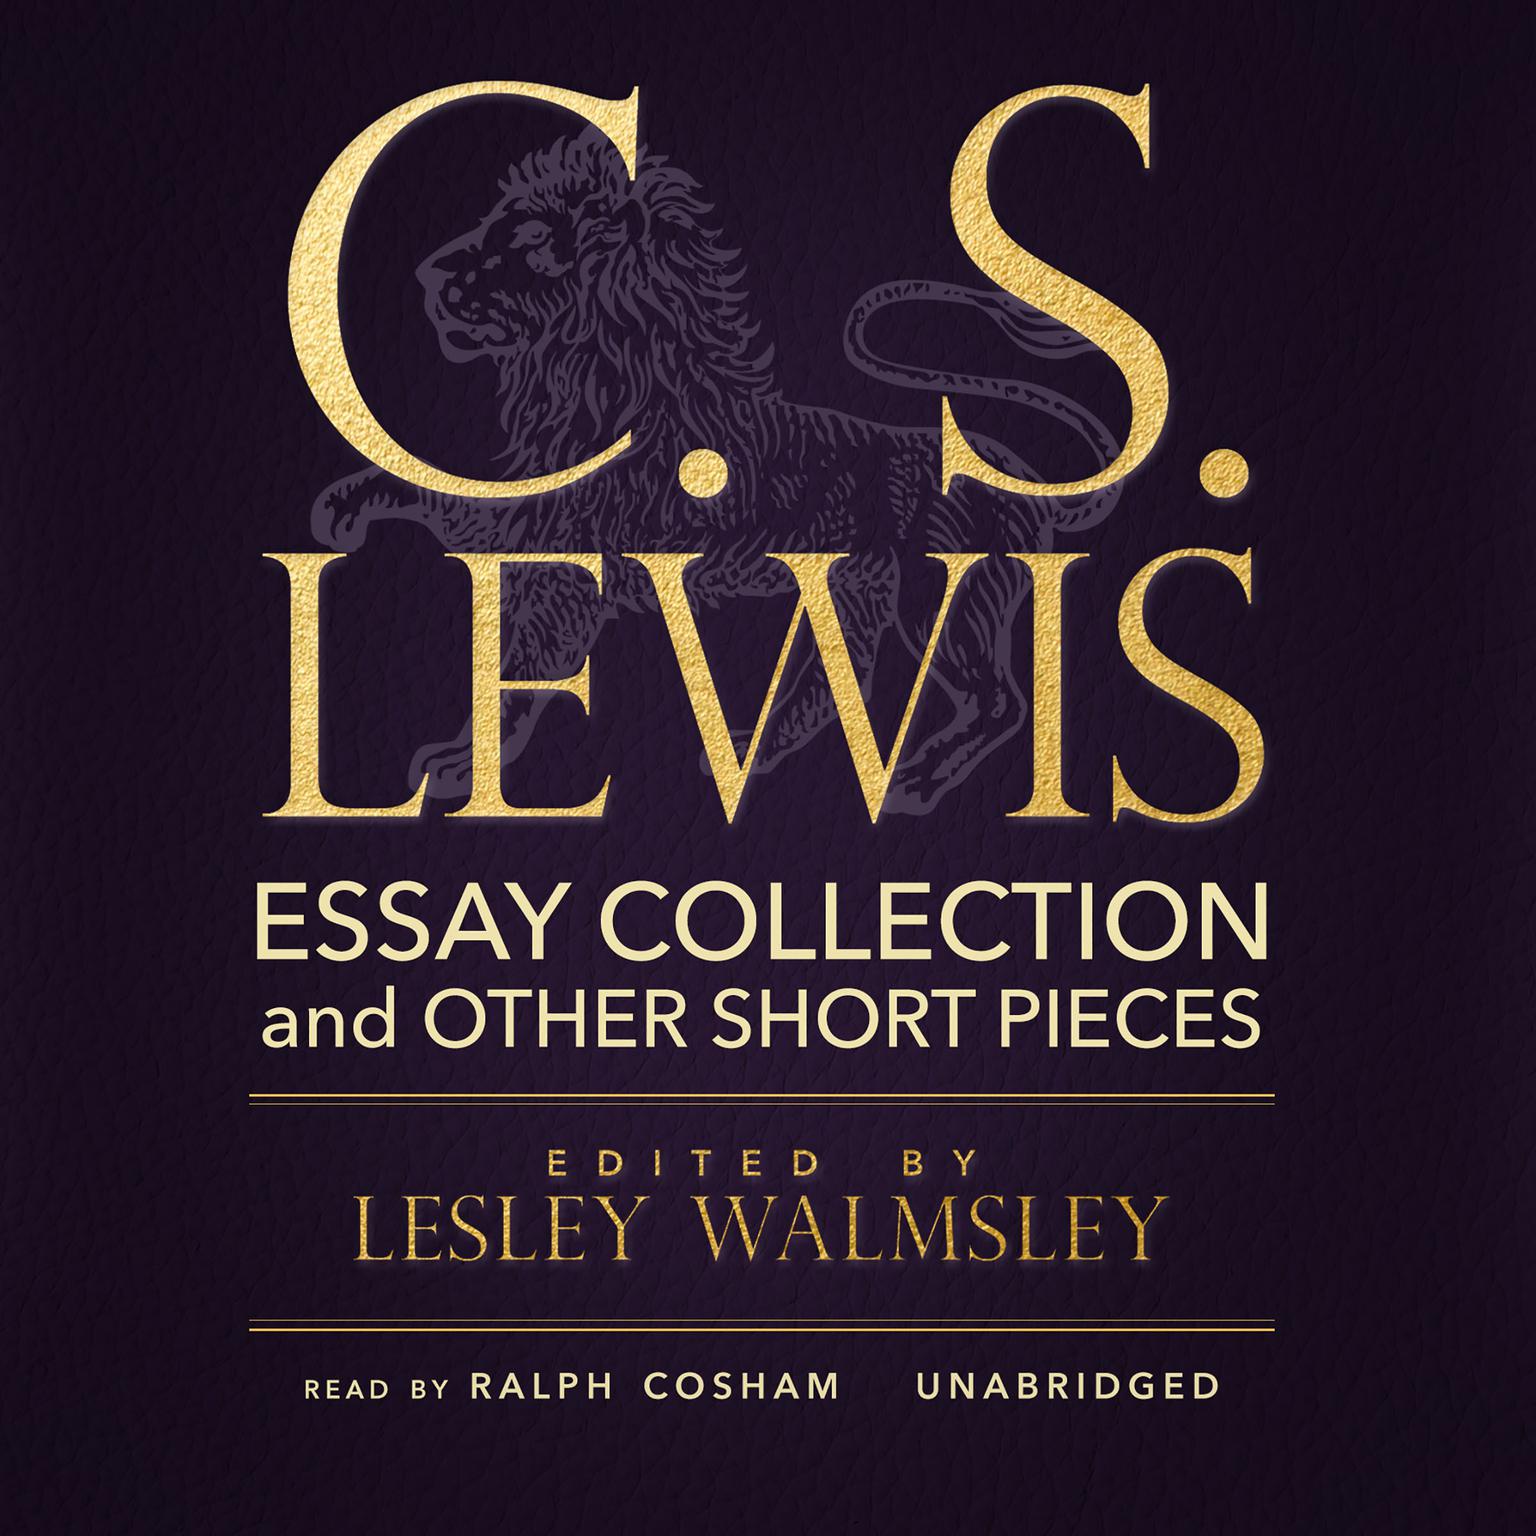 C. S. Lewis: Essay Collection and Other Short Pieces Audiobook, by C. S. Lewis